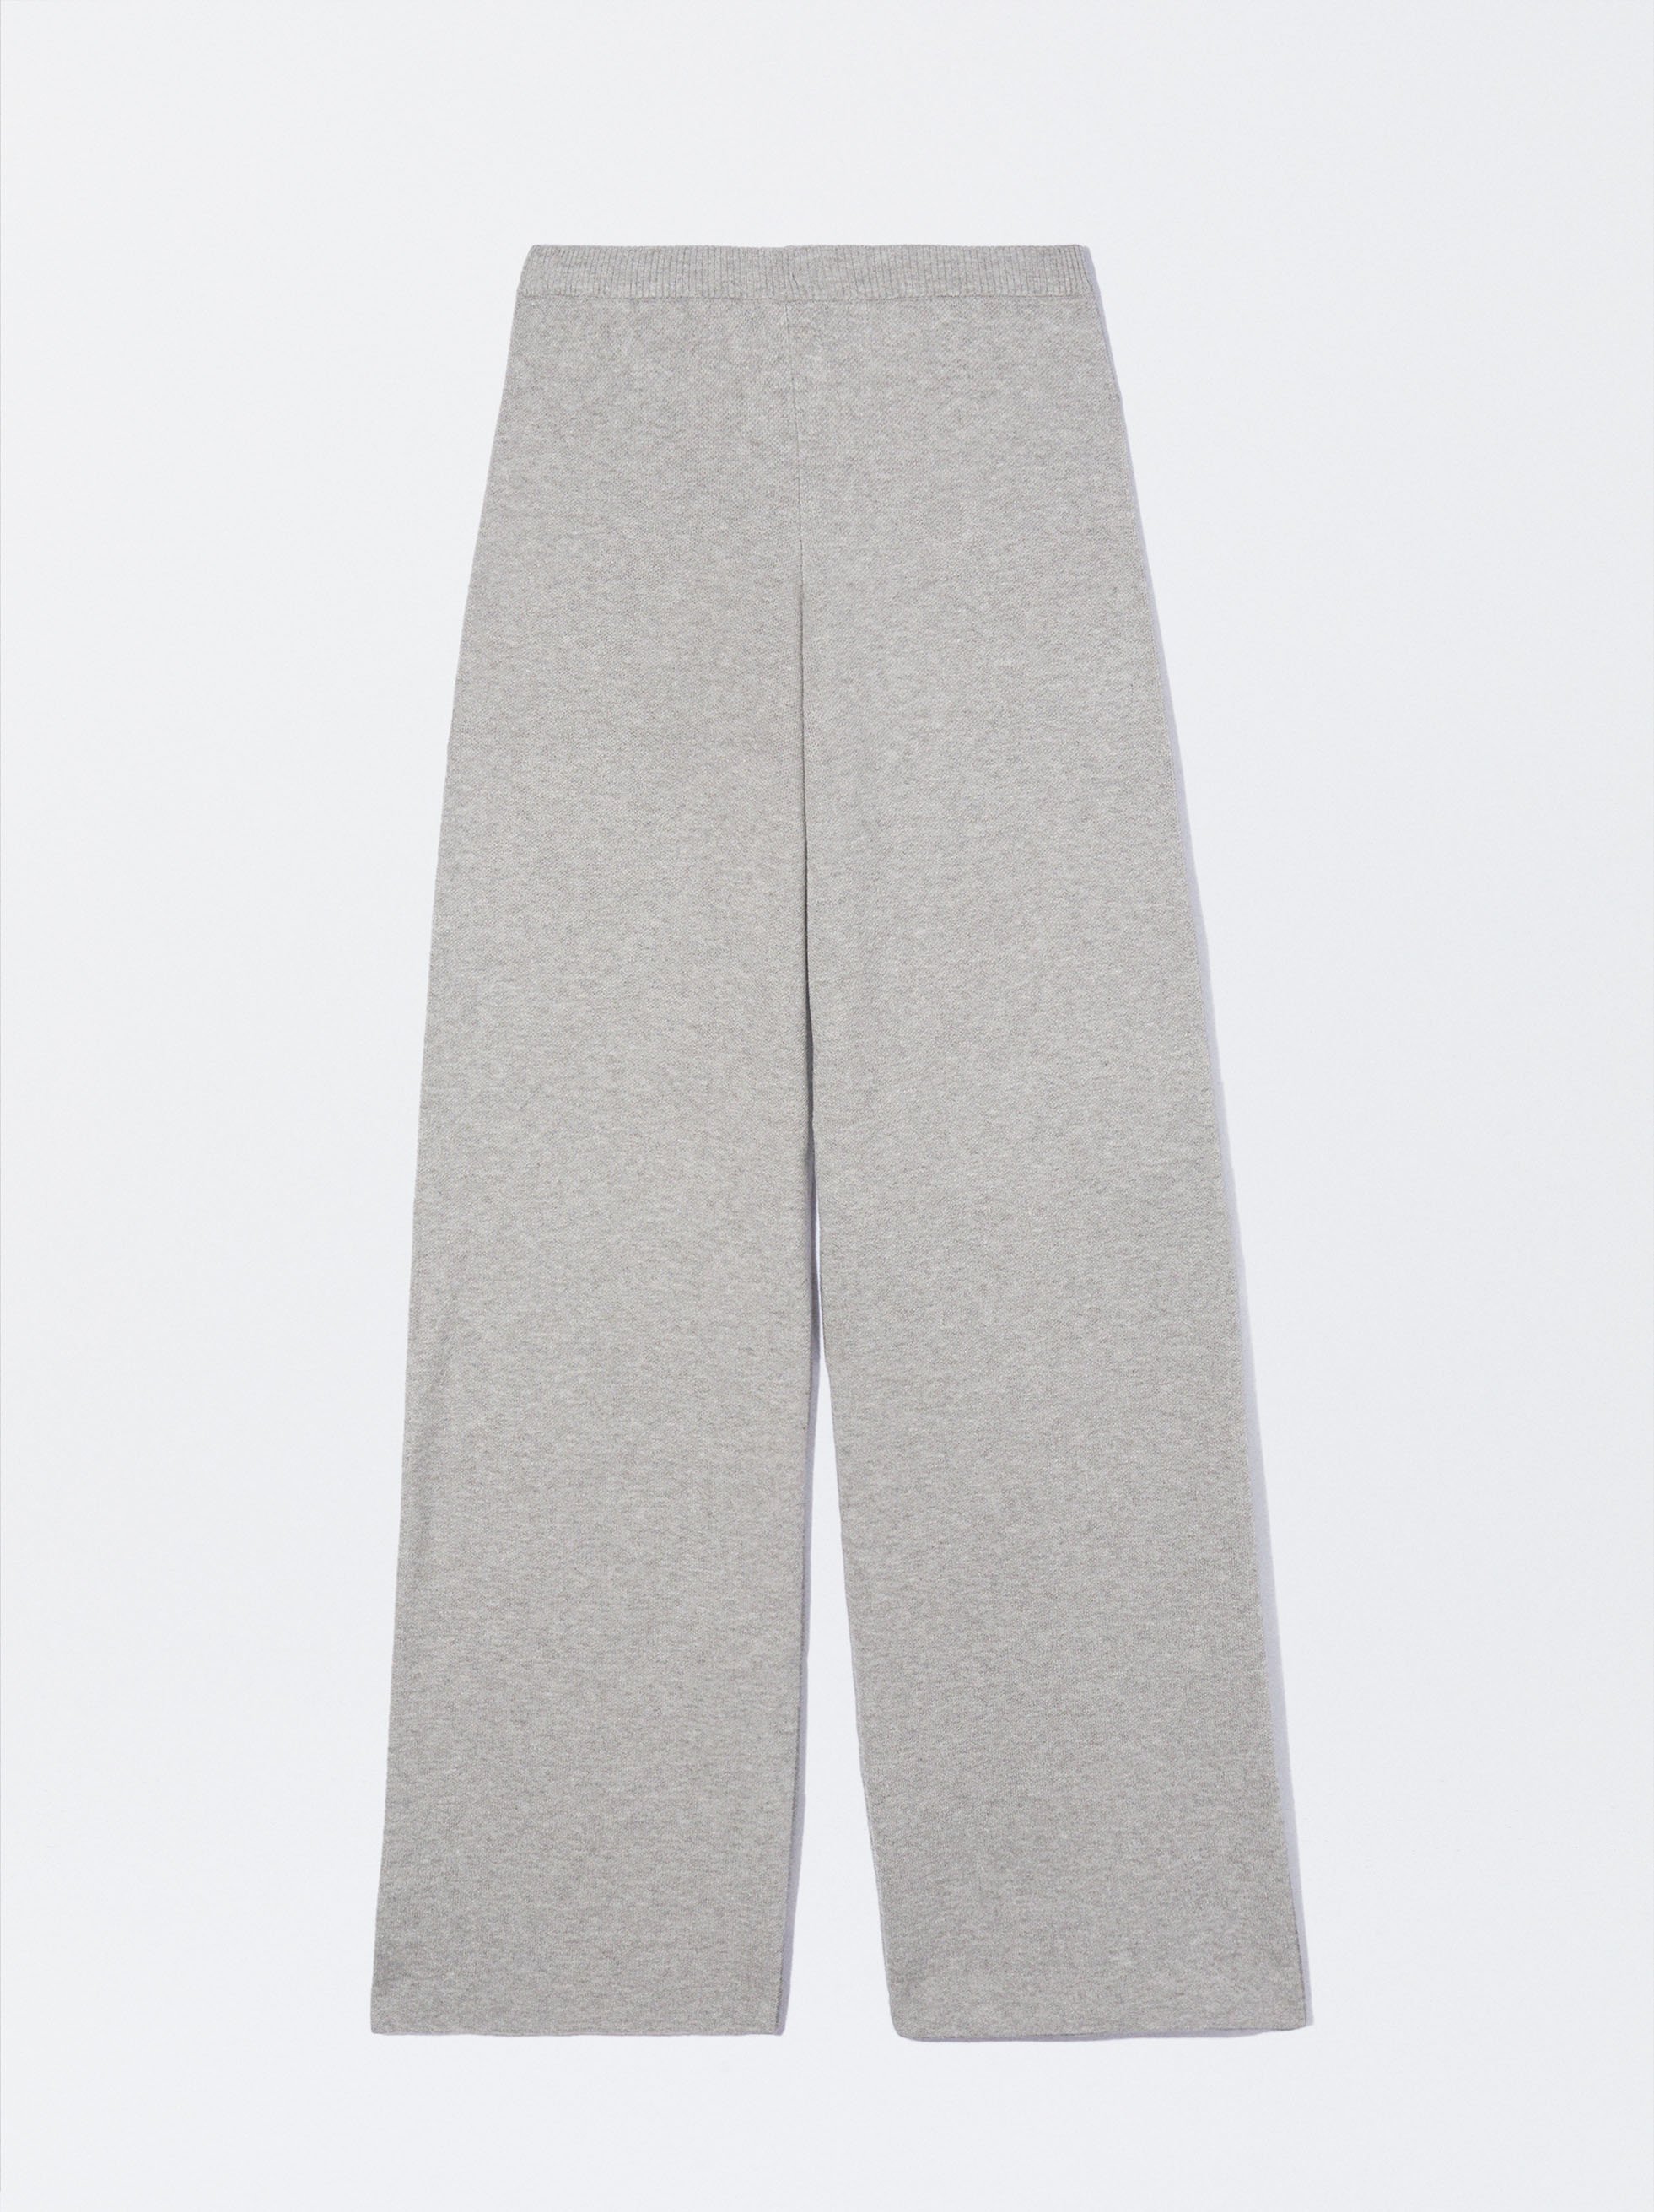 Knit Trousers image number 5.0